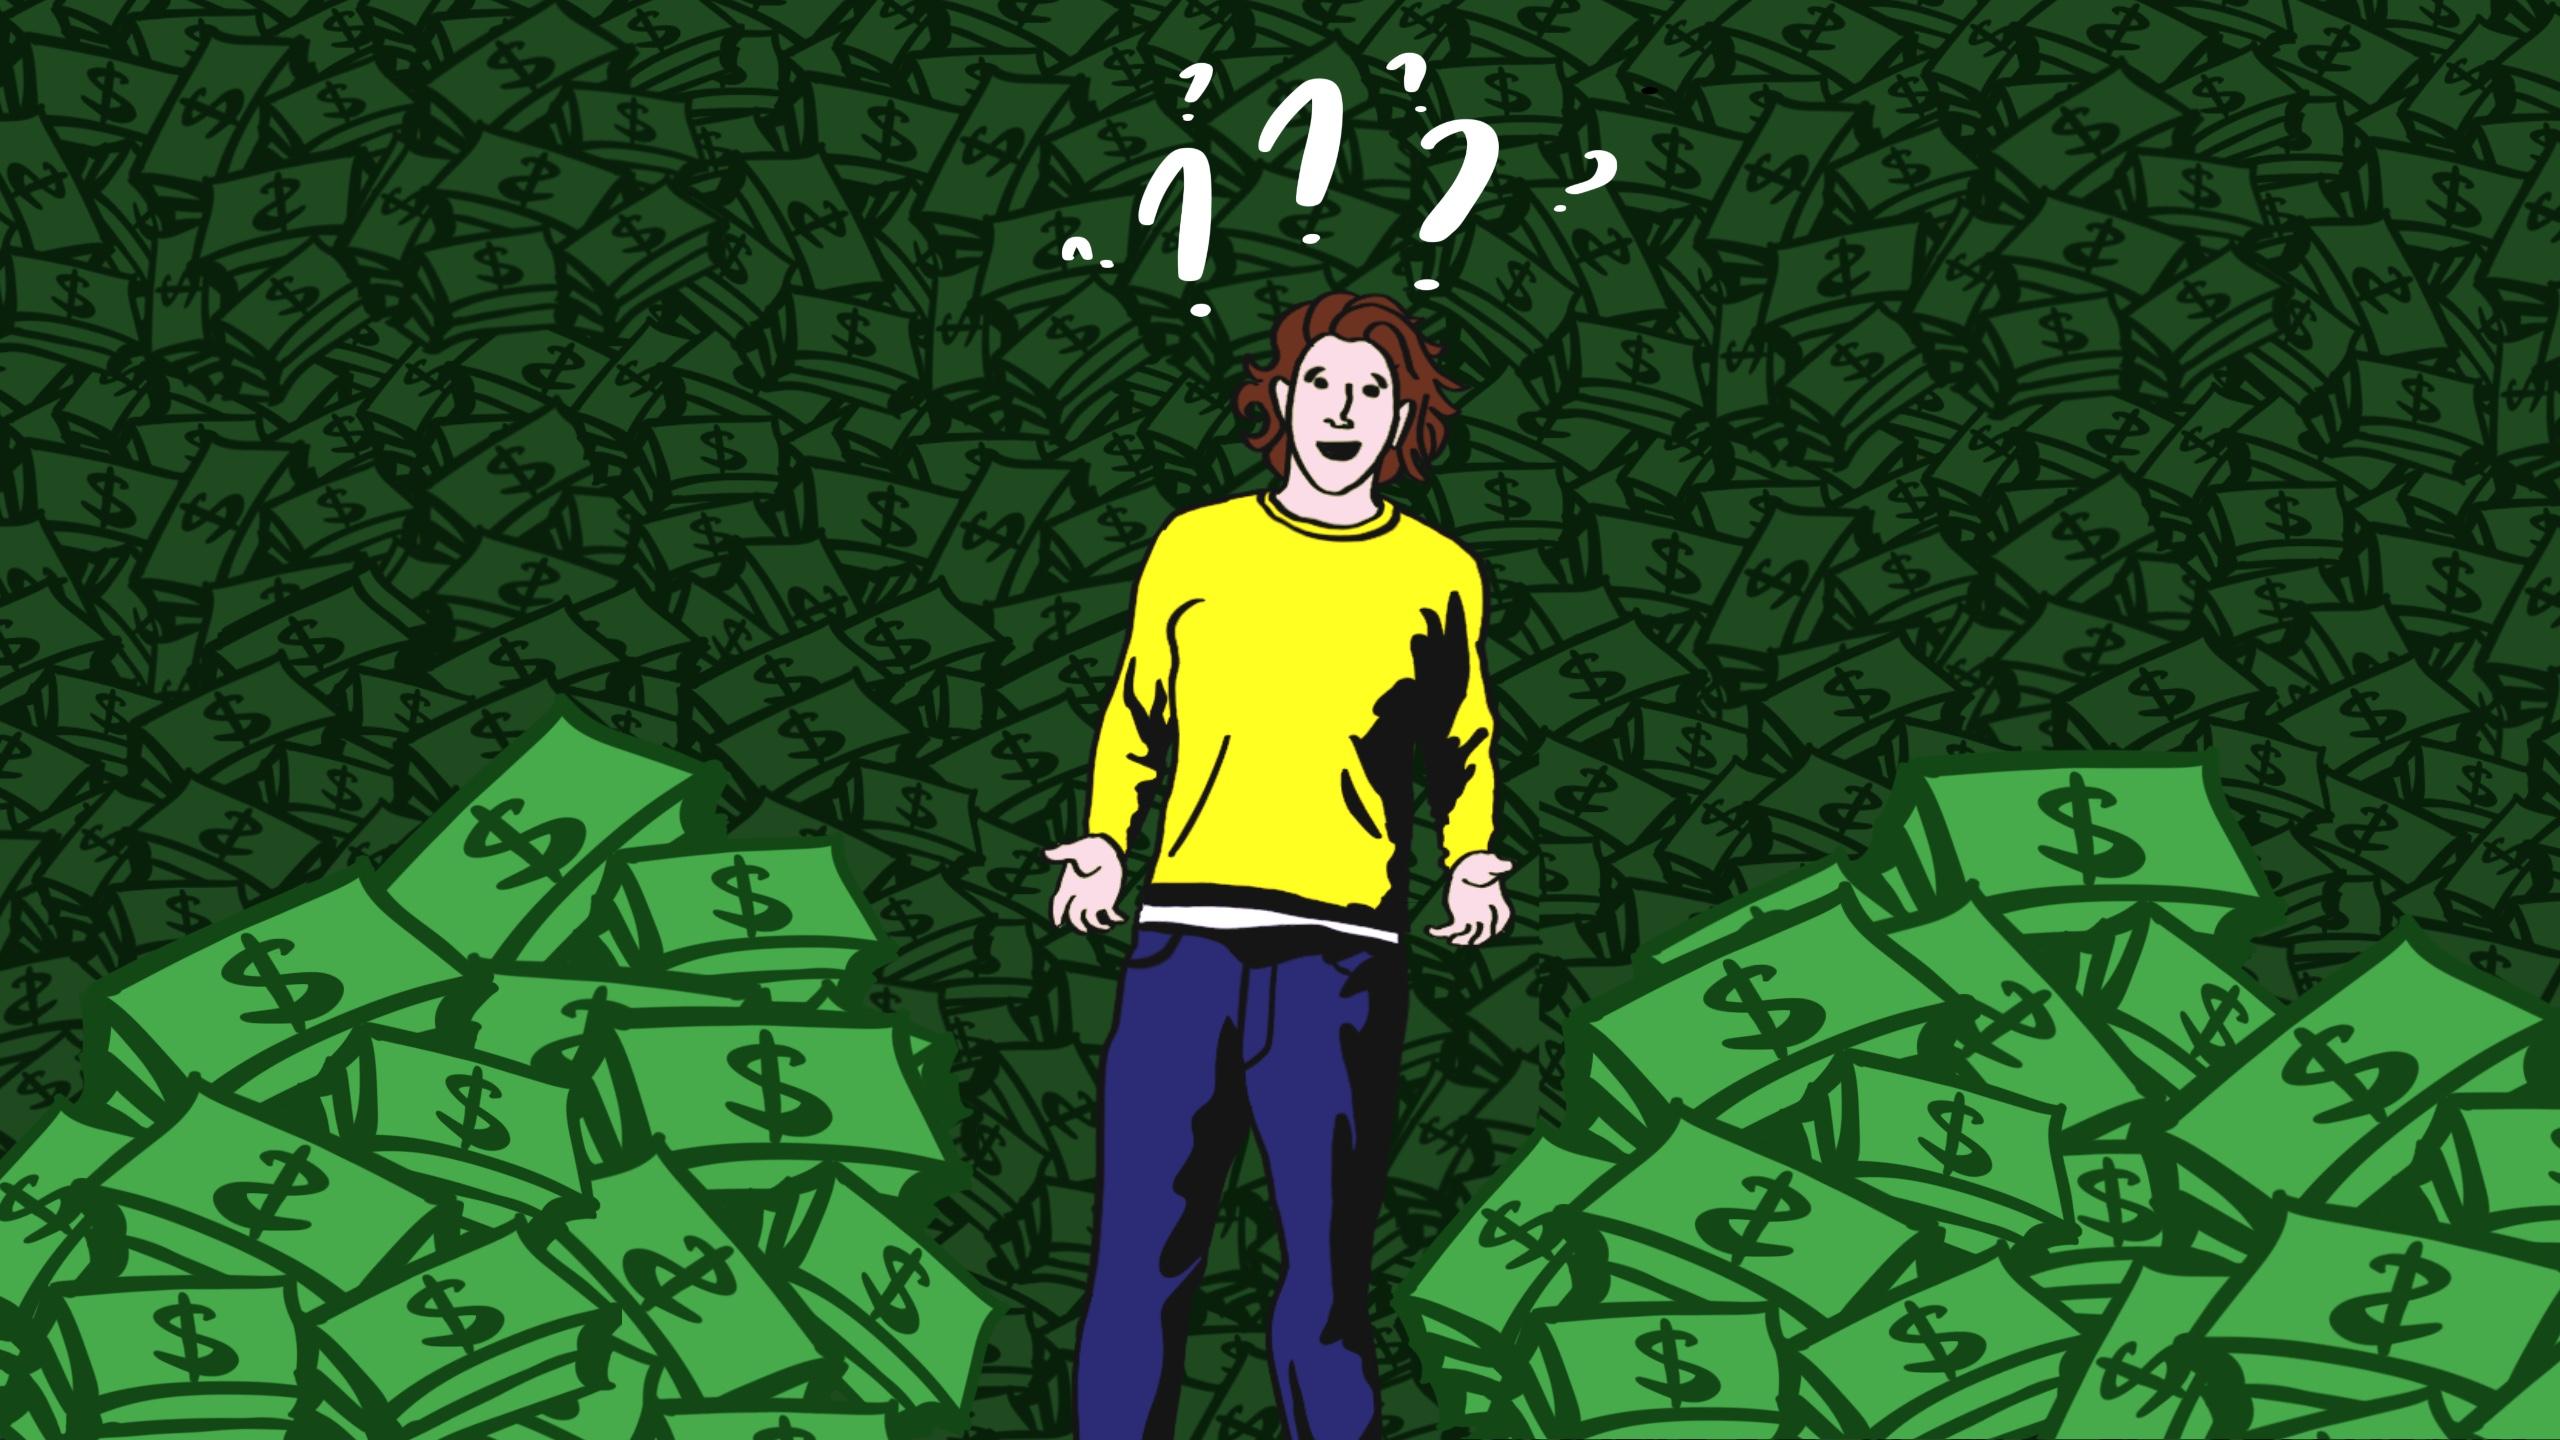 An illustration of a student surrounded by cash and three question marks above his head